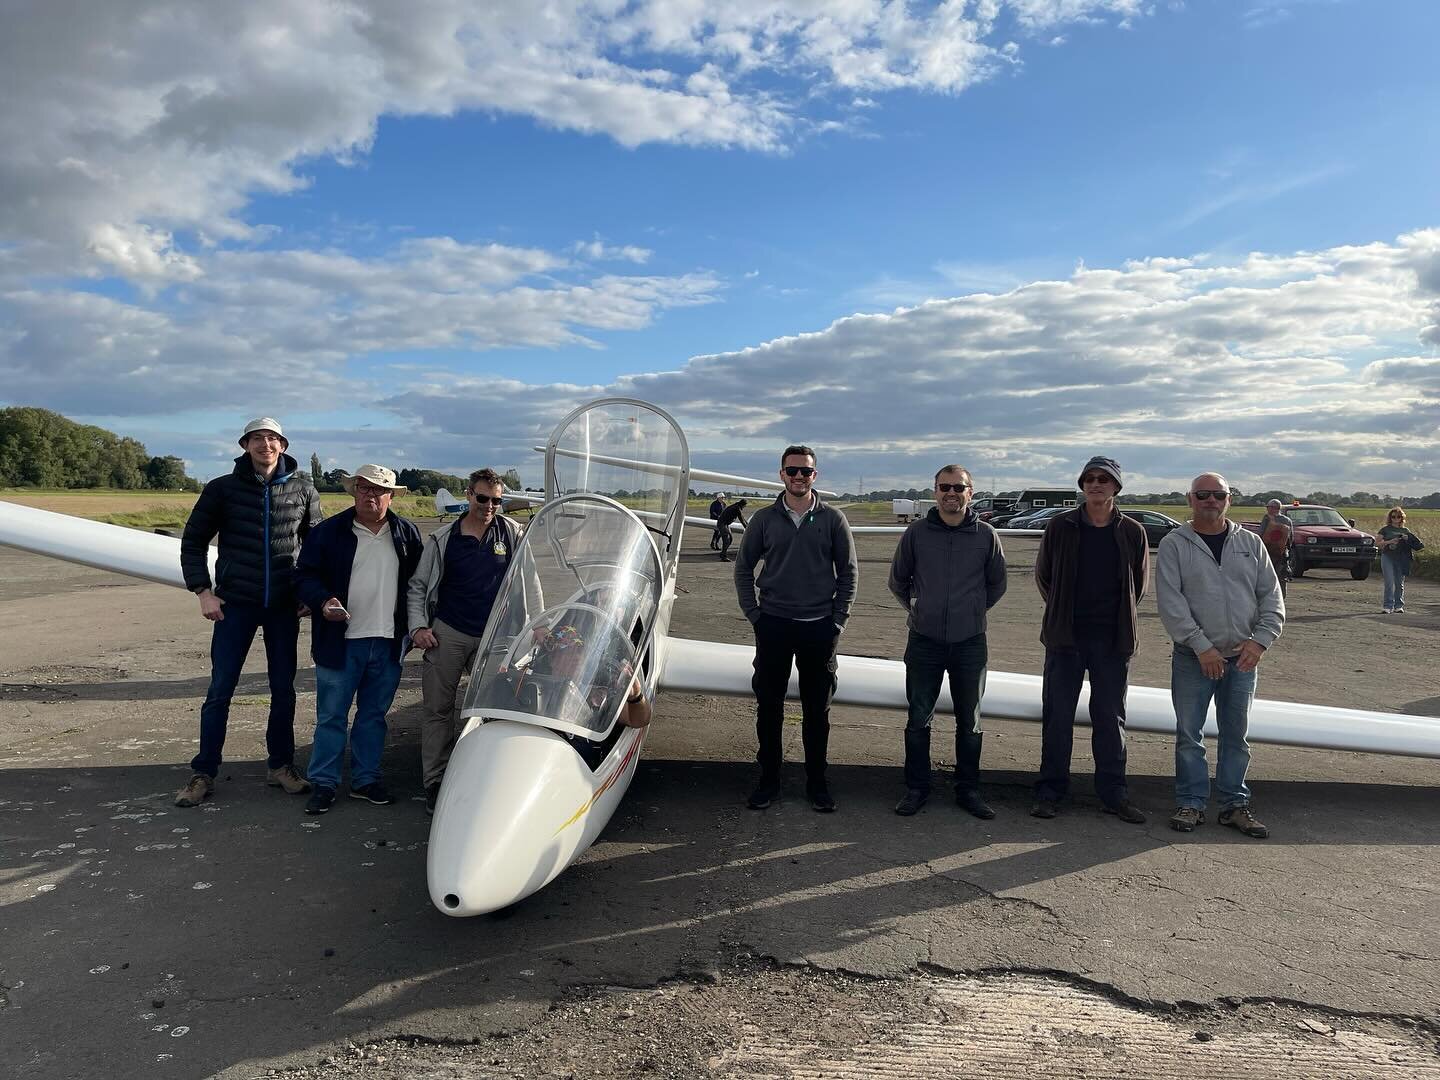 Great day yesterday at Burn with our friendly aerobatic competition. Congratulations to all winners! Big thanks to @benjieambler for the tugging, George and Andy for organising and others keeping the day running.